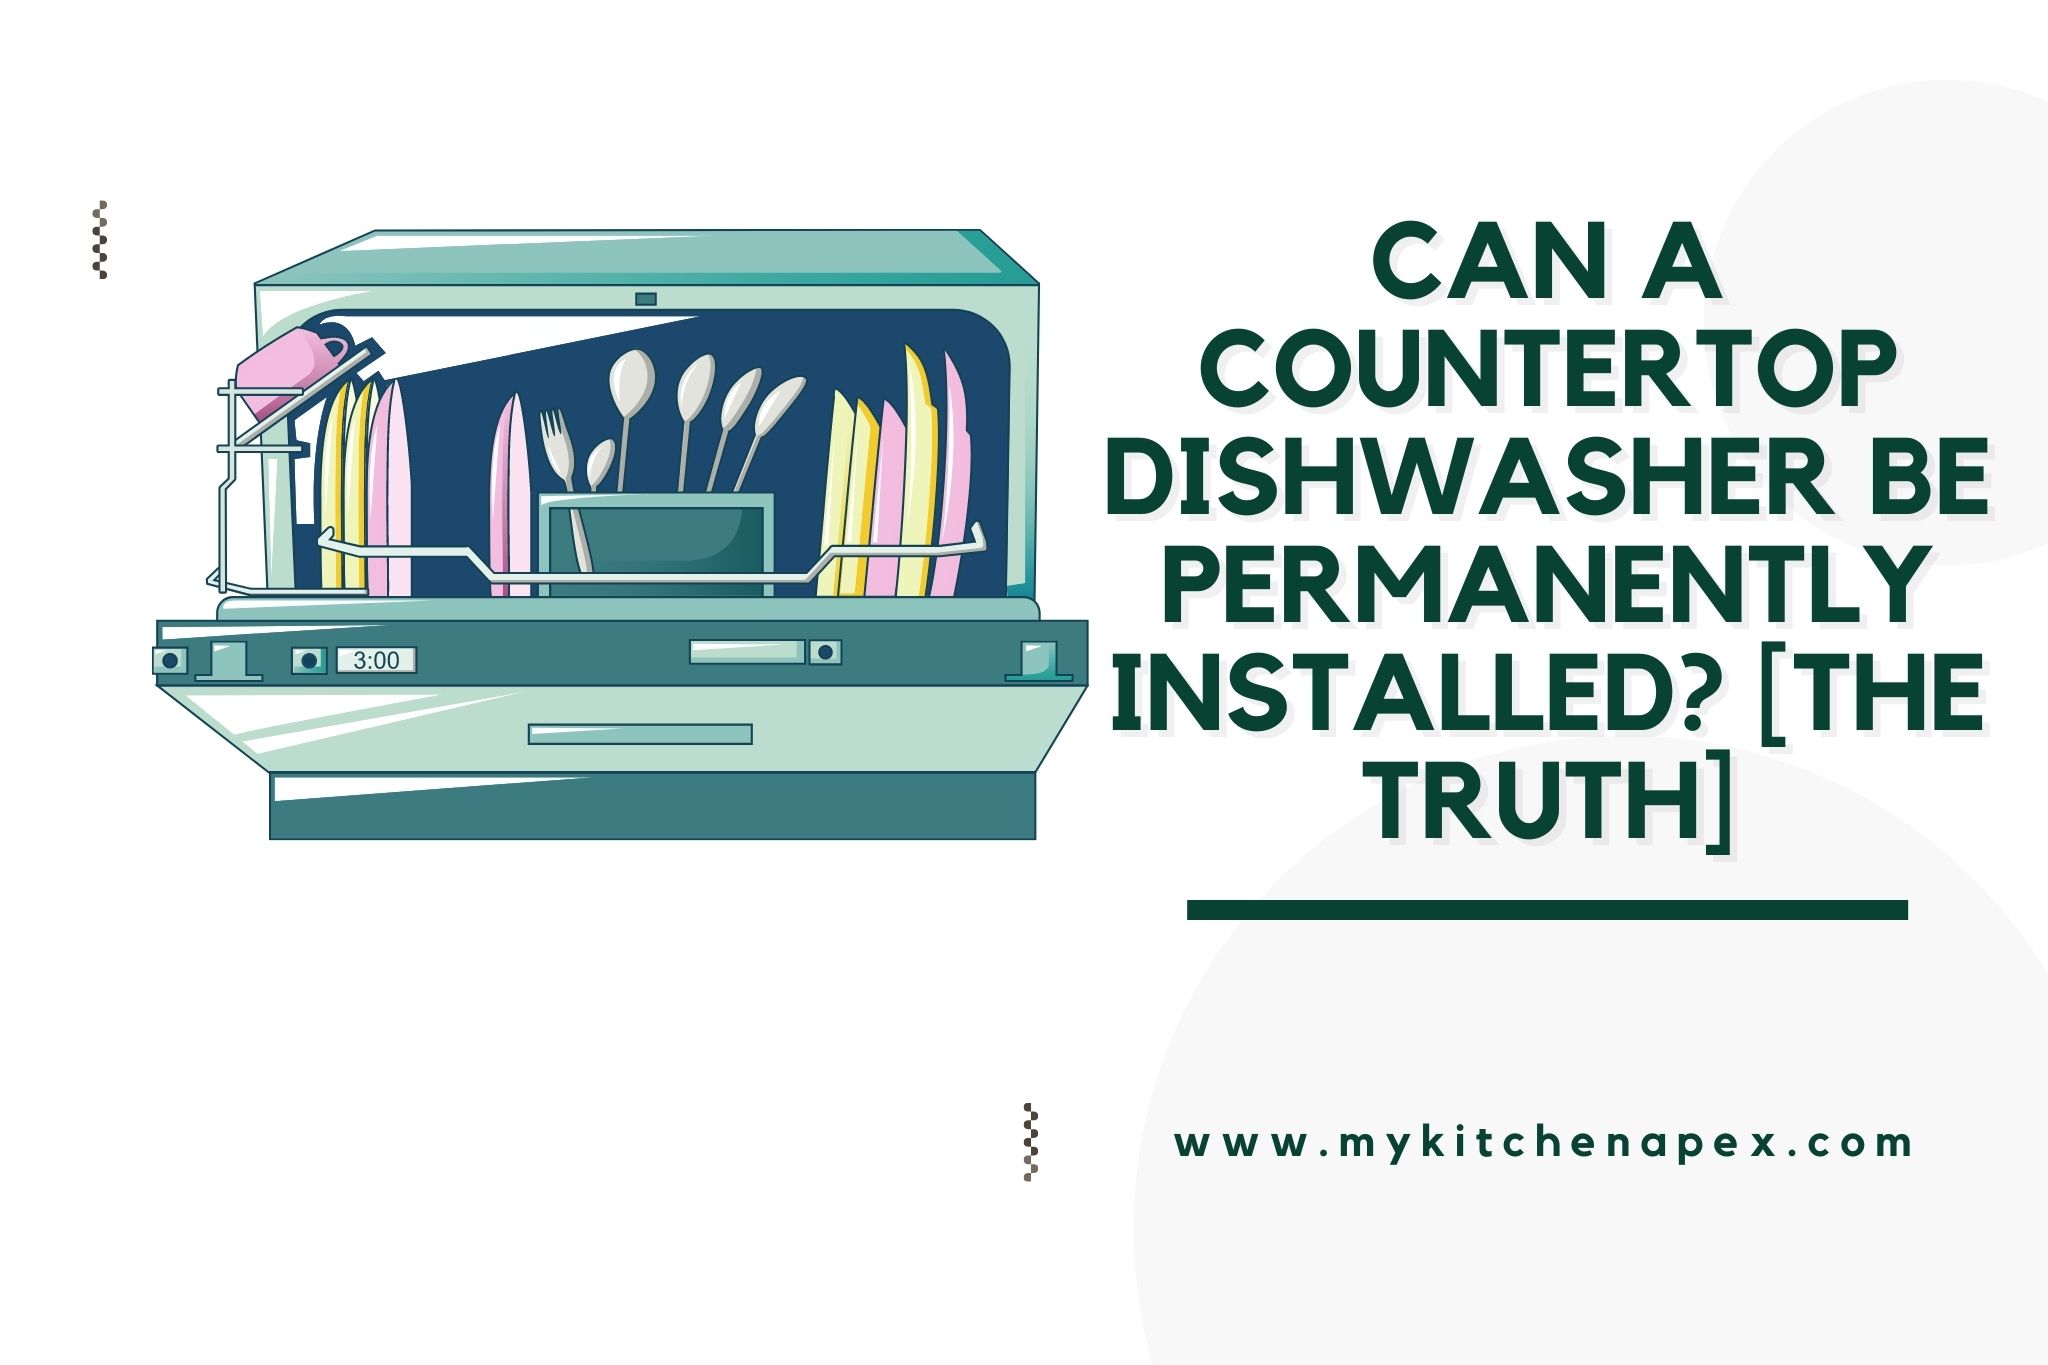 Can A Countertop Dishwasher Be Permanently Installed? [The TRUTH]